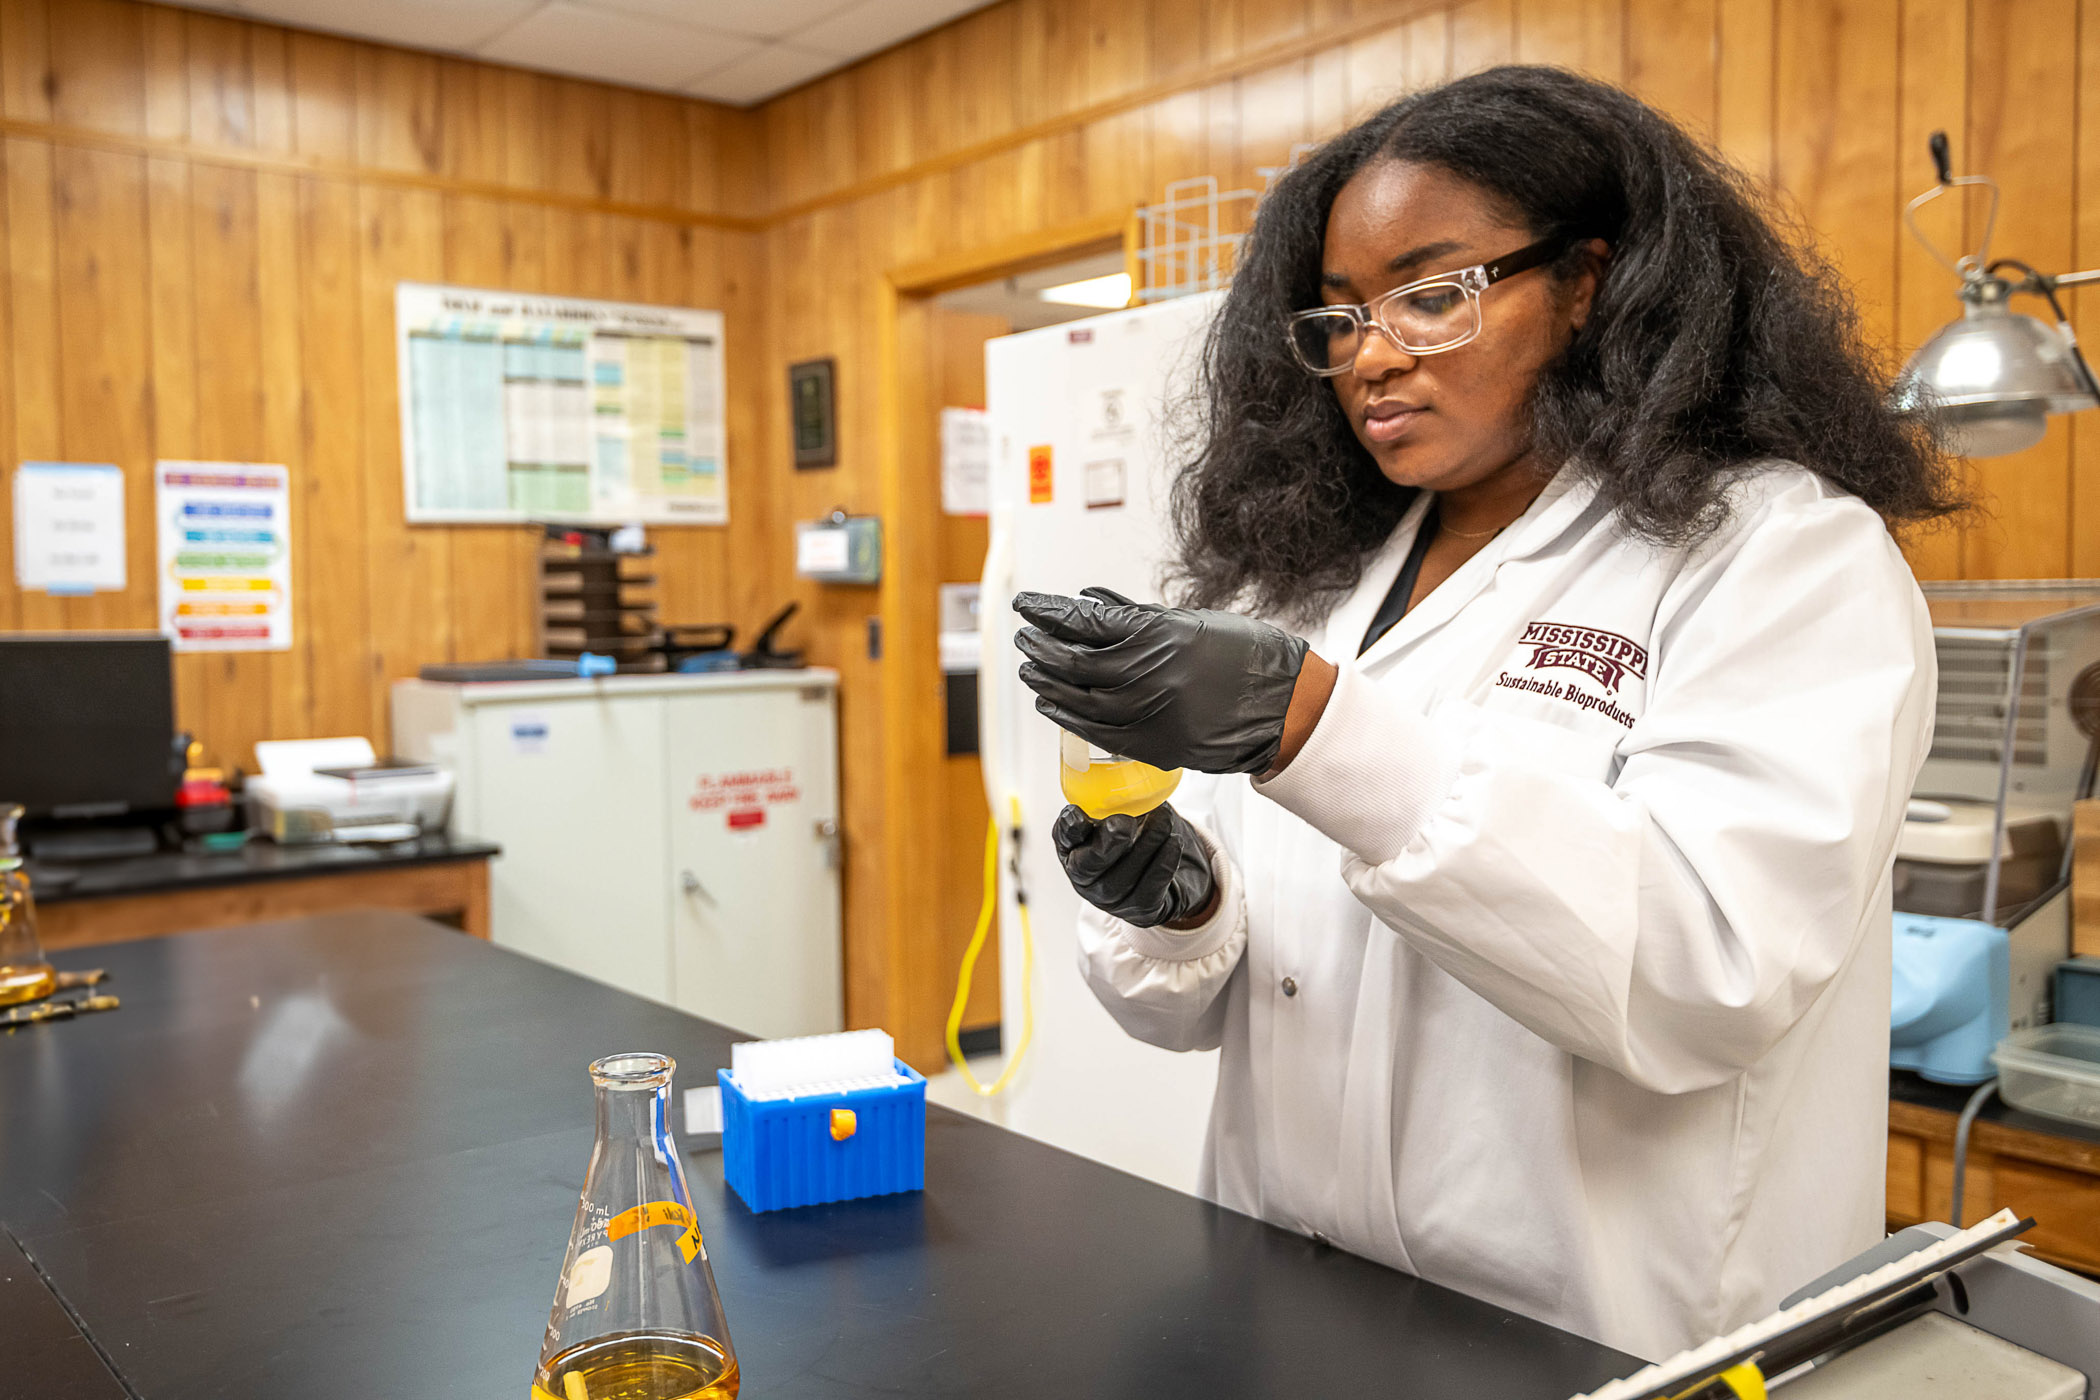 Aleria Story, pictured working in a lab on the ֱ campus